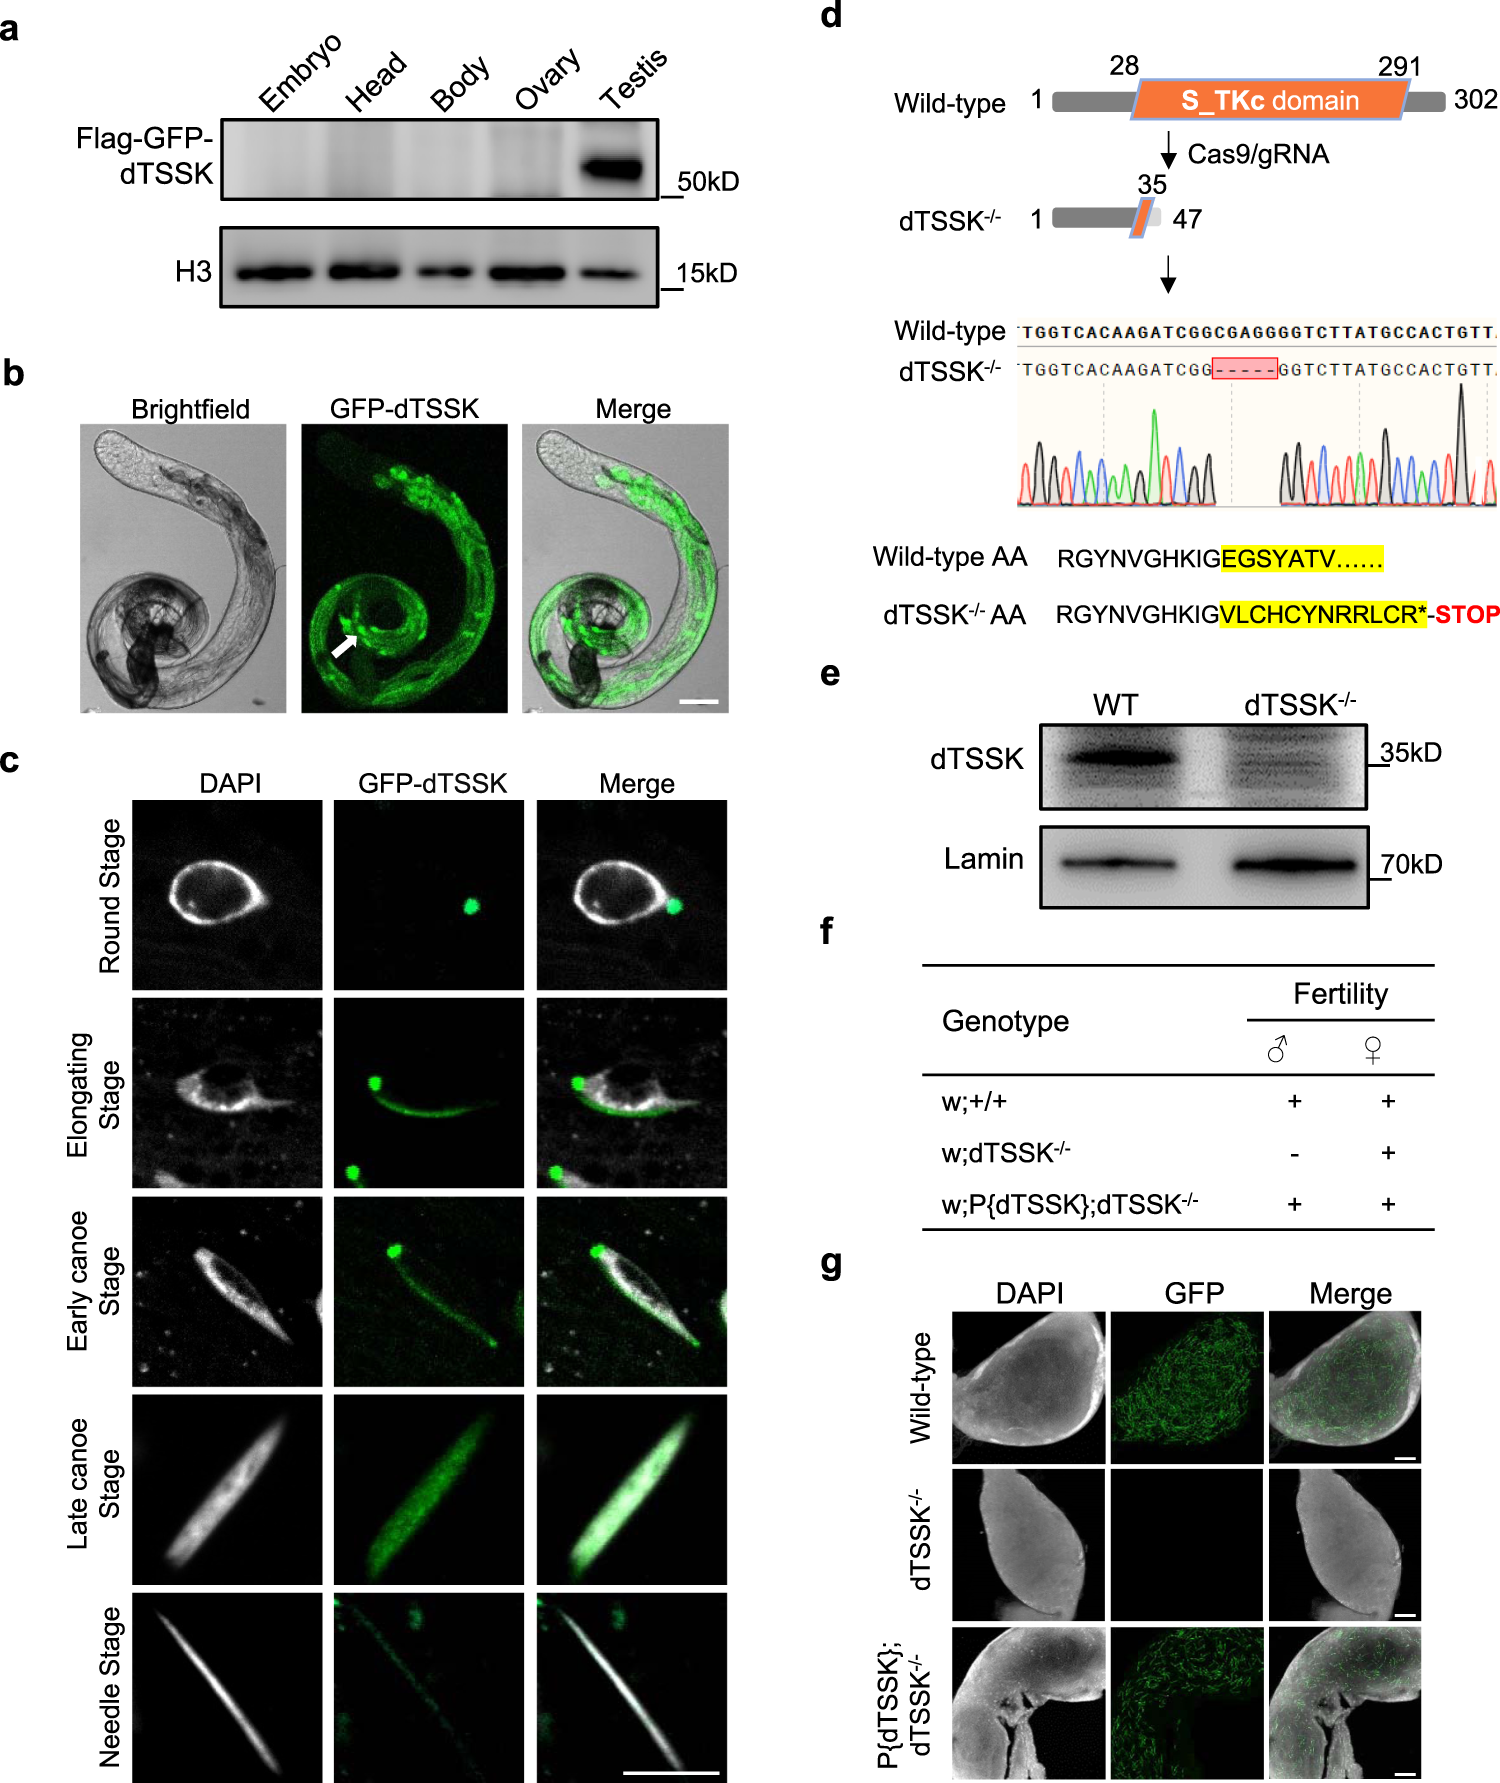 Broad phosphorylation mediated by testis-specific serine/threonine kinases contributes to spermiogenesis and male fertility Nature Communications picture